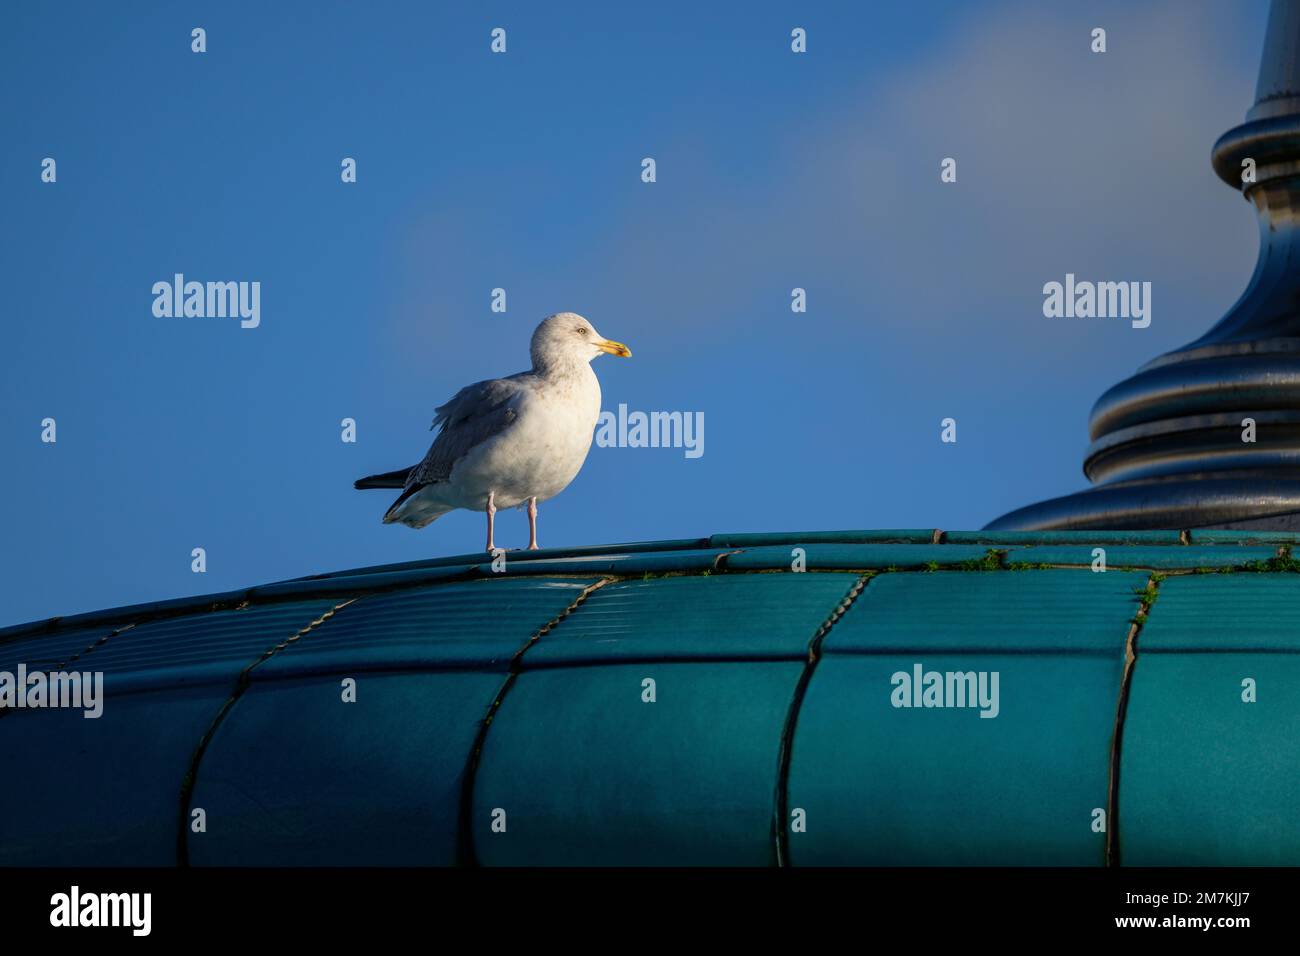 A seagull in winter sunshine stands on the roof of Eastbourne bandstand. Stock Photo